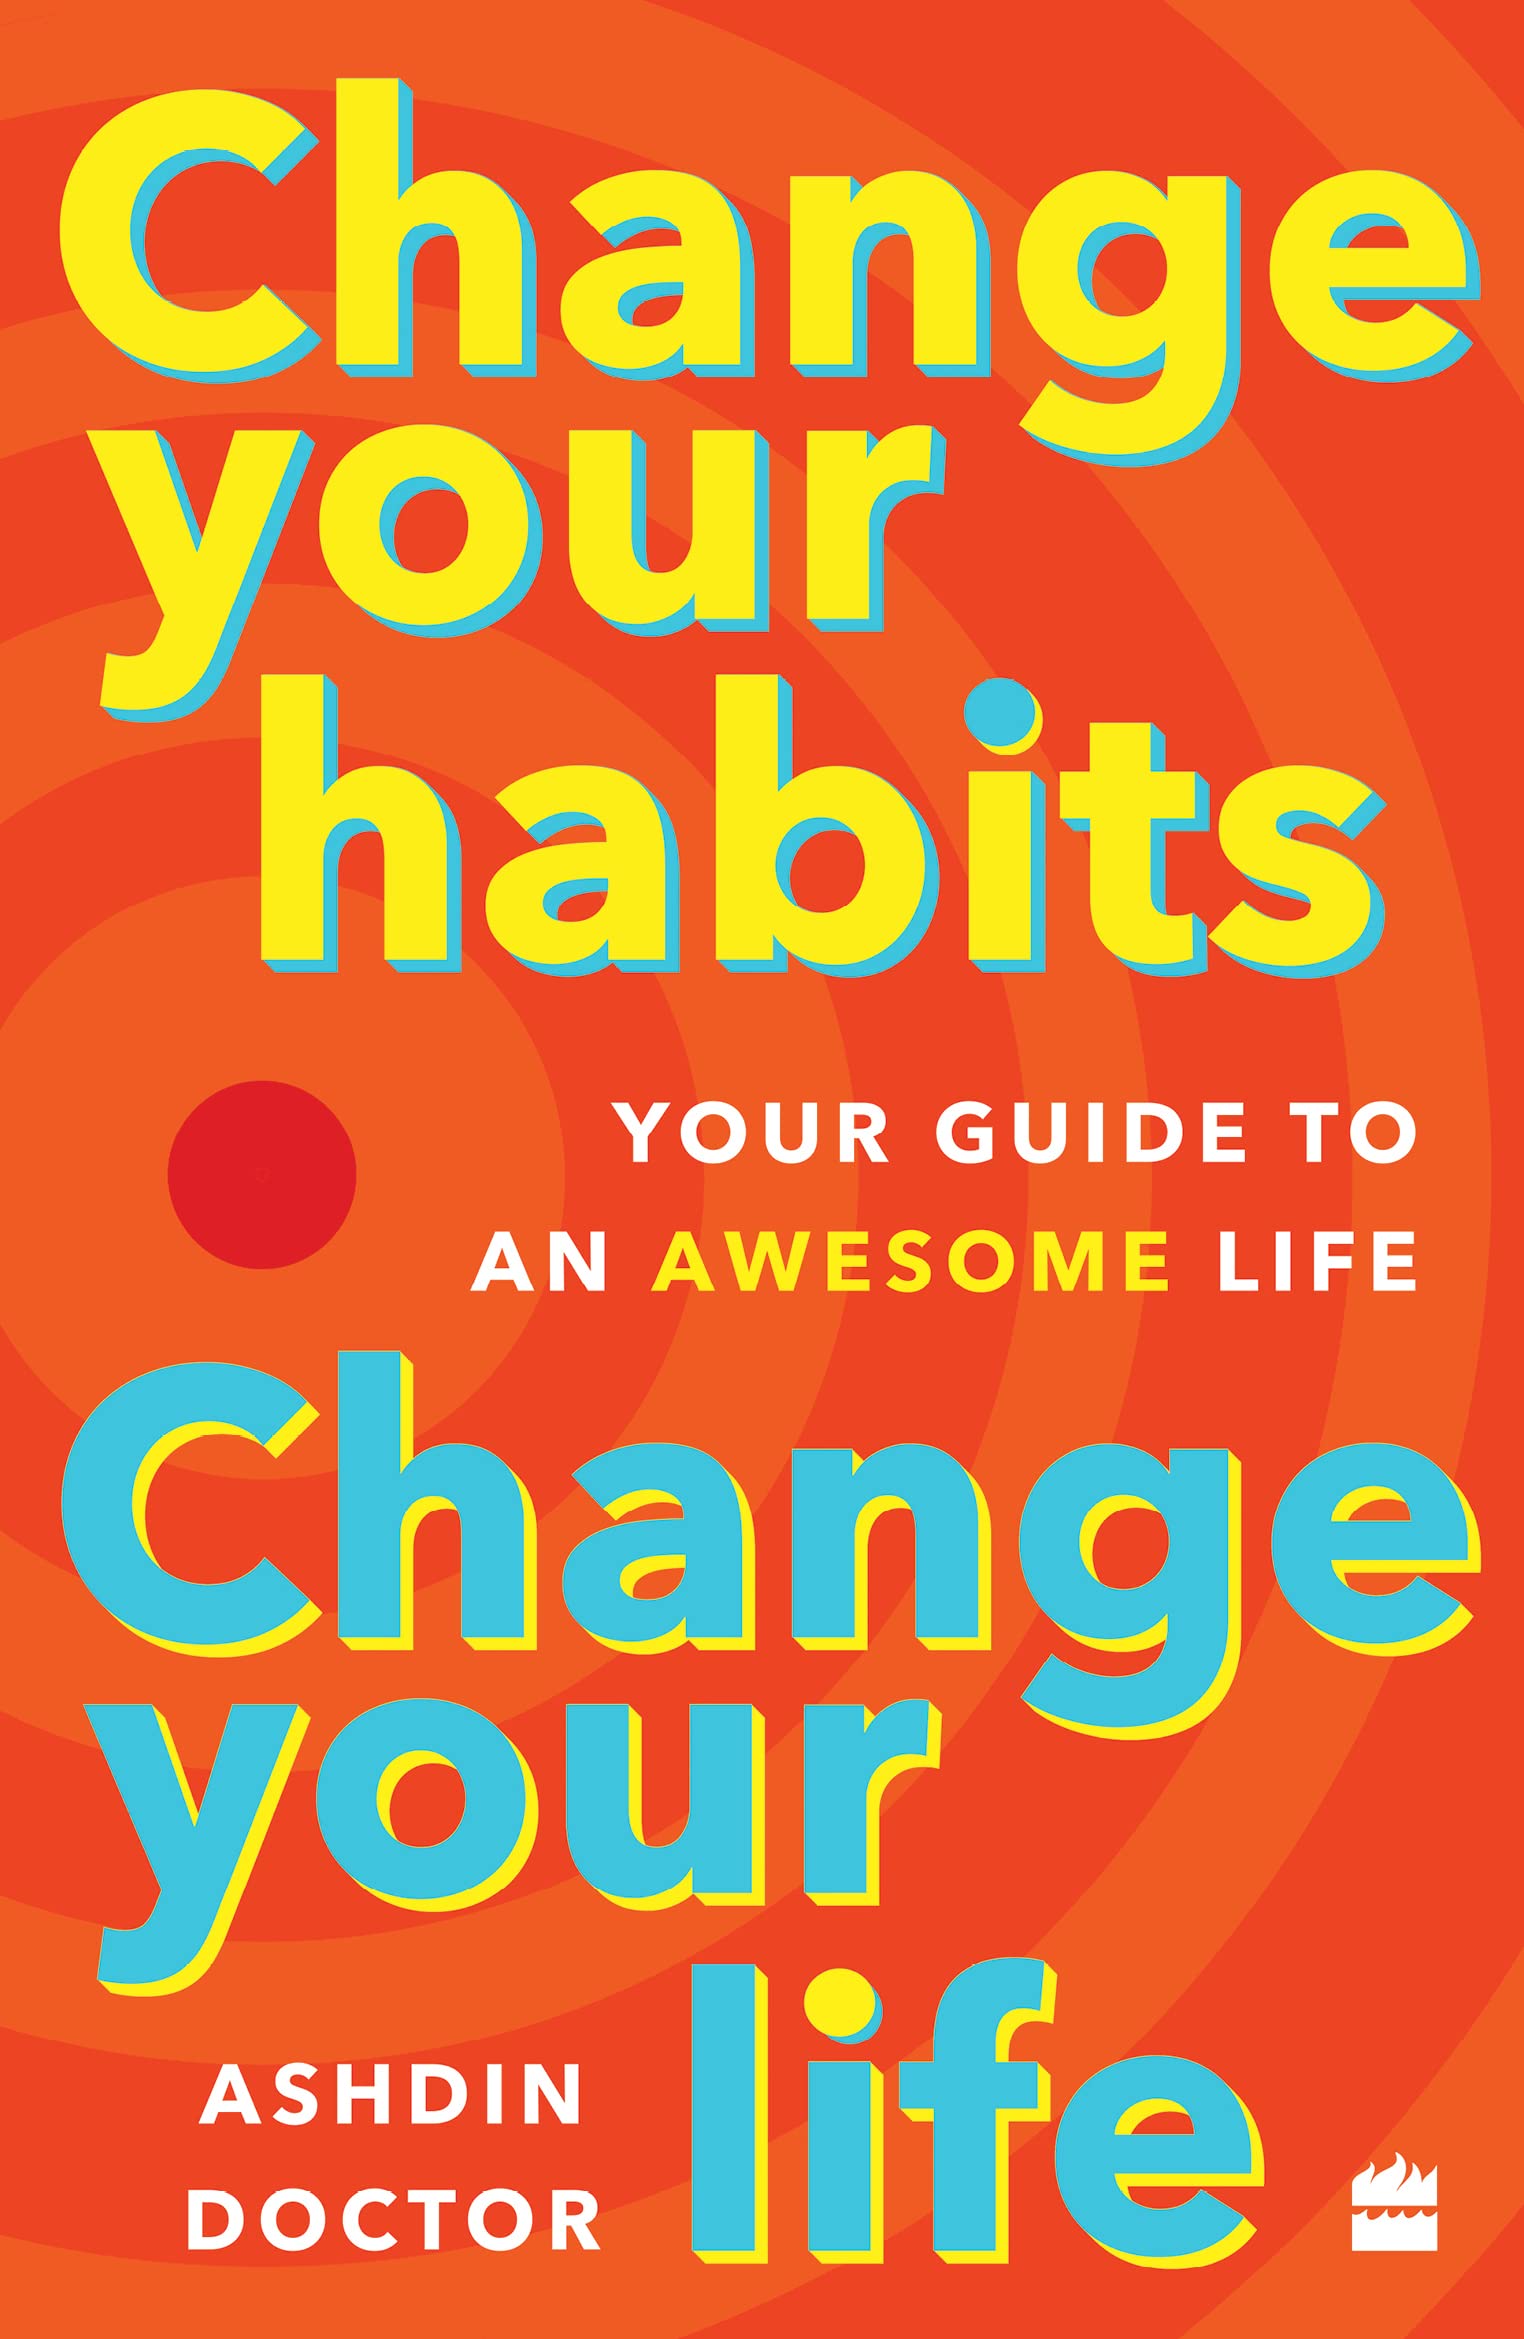 In this book, Ashdin Doctor shares the three golden rules for habit change